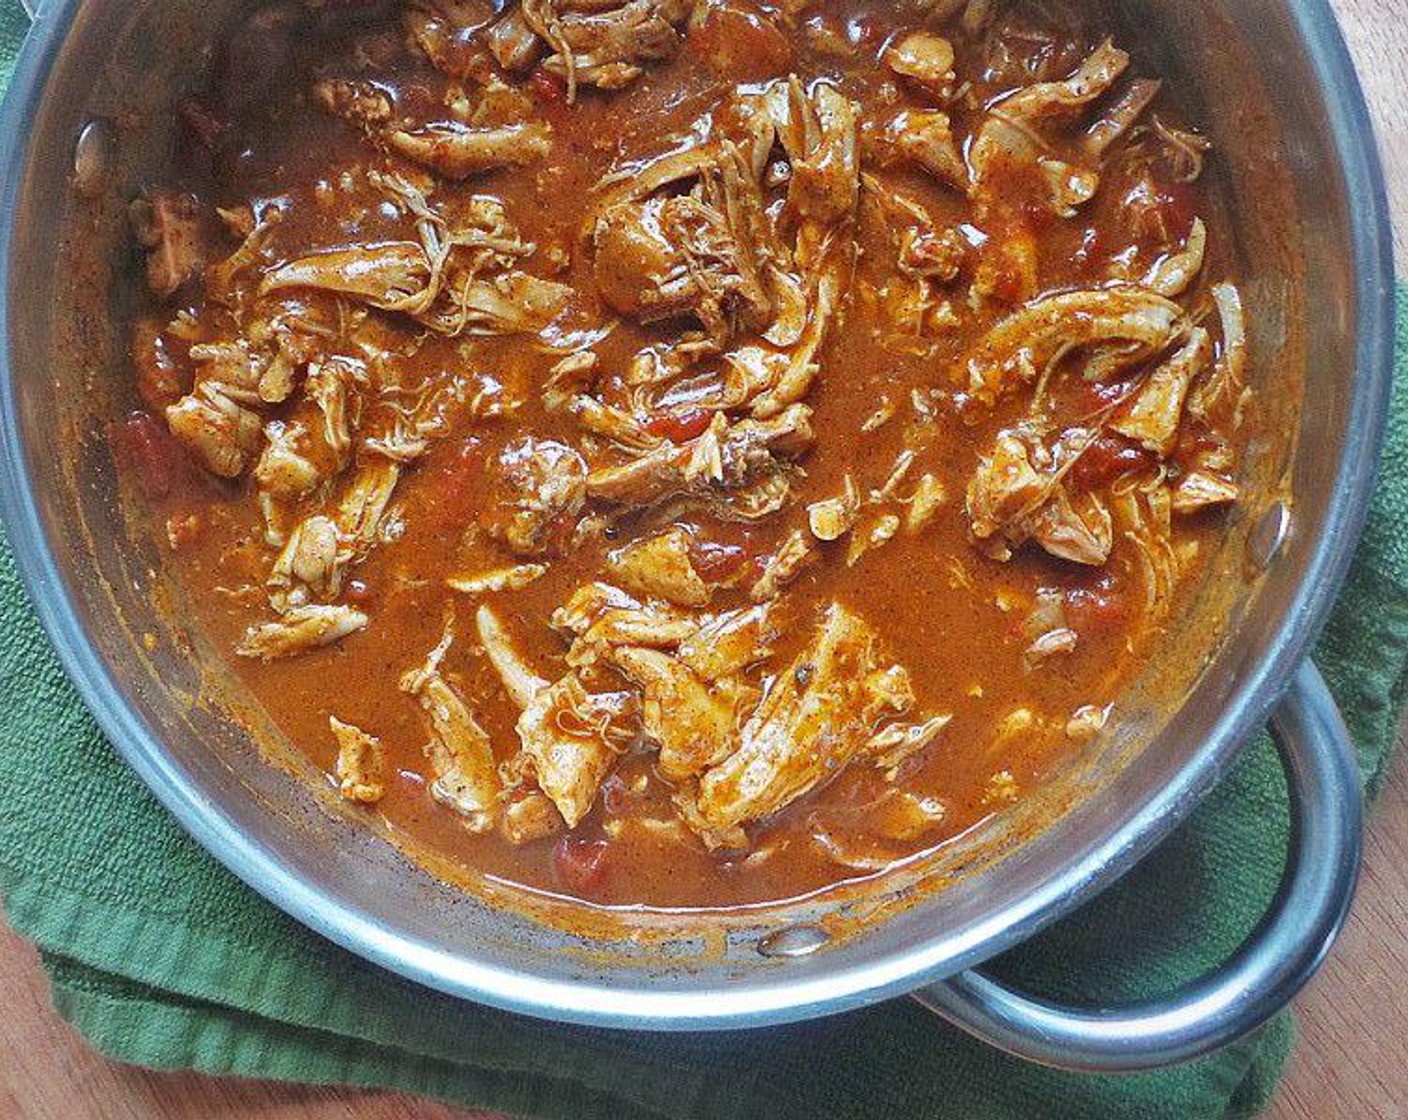 step 6 Transfer thighs to enchilada sauce and add the Diced Tomatoes (1 can). Cover and simmer for 45 minutes. When finished, the chicken will be fork tender and fall right off the bone. Discard the bone and skin. Season chicken with Kosher Salt (to taste) as desired.